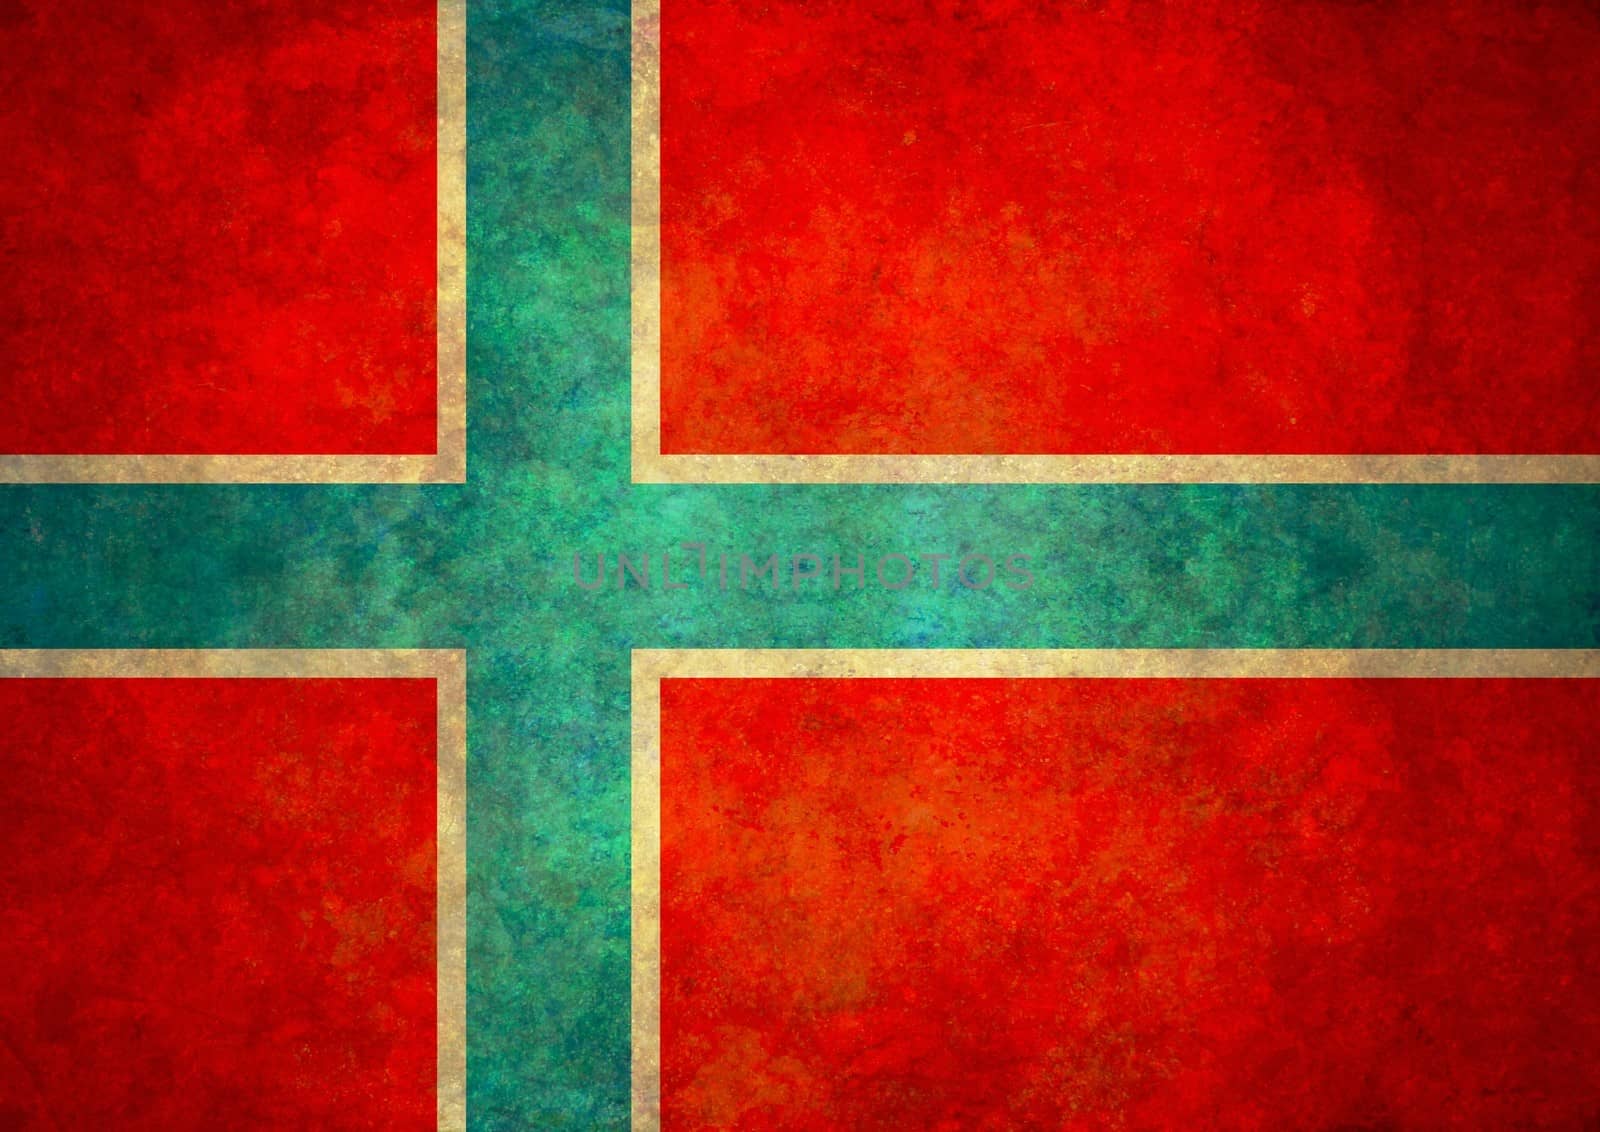 Illustrated flag of Norway with grunge effect